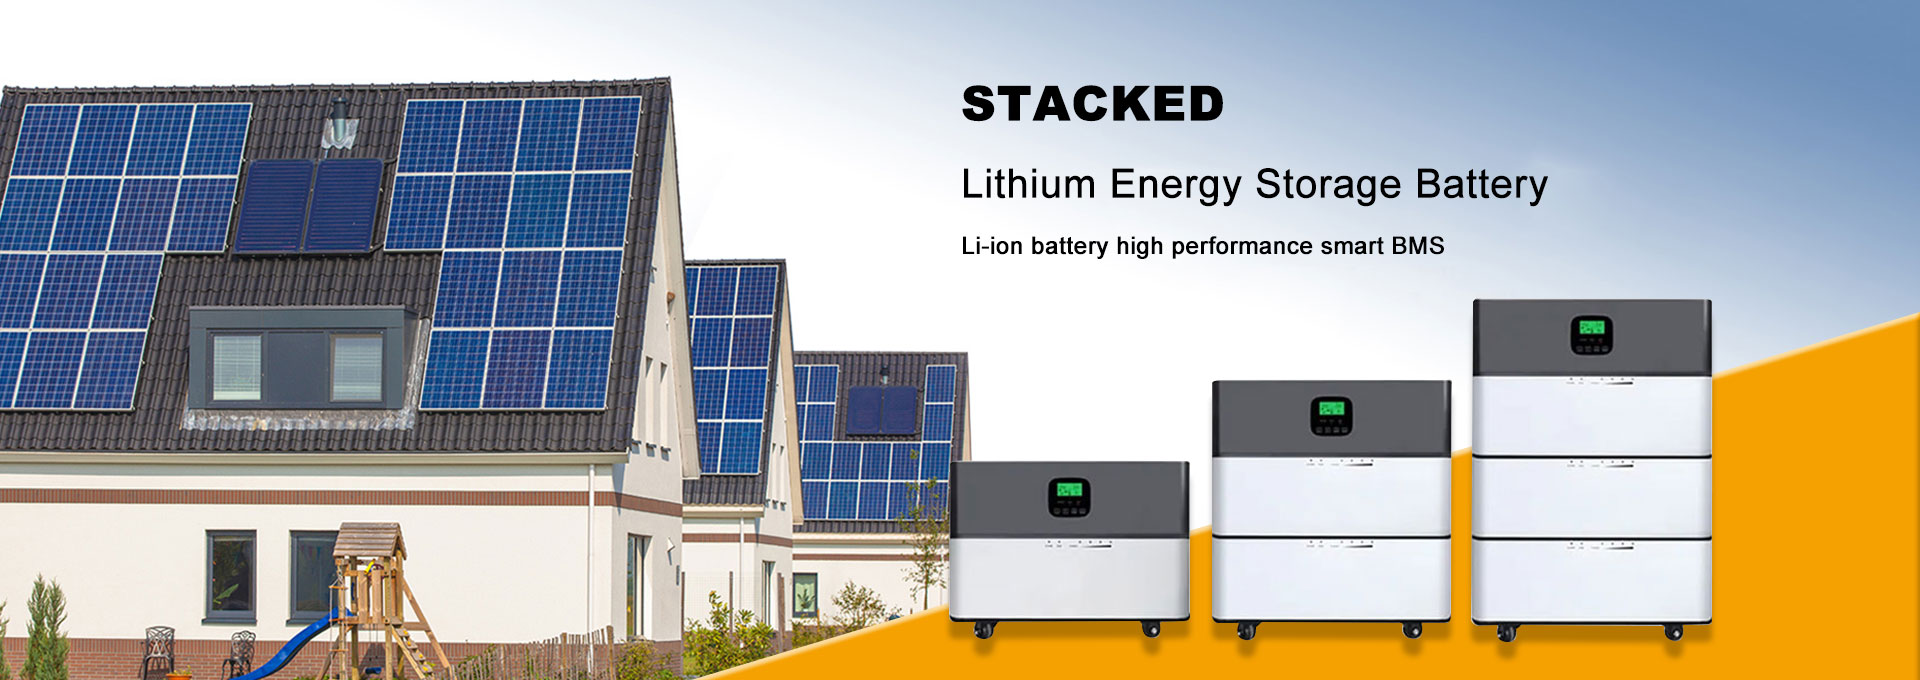 China Stacked Lithium Battery Manufacturers